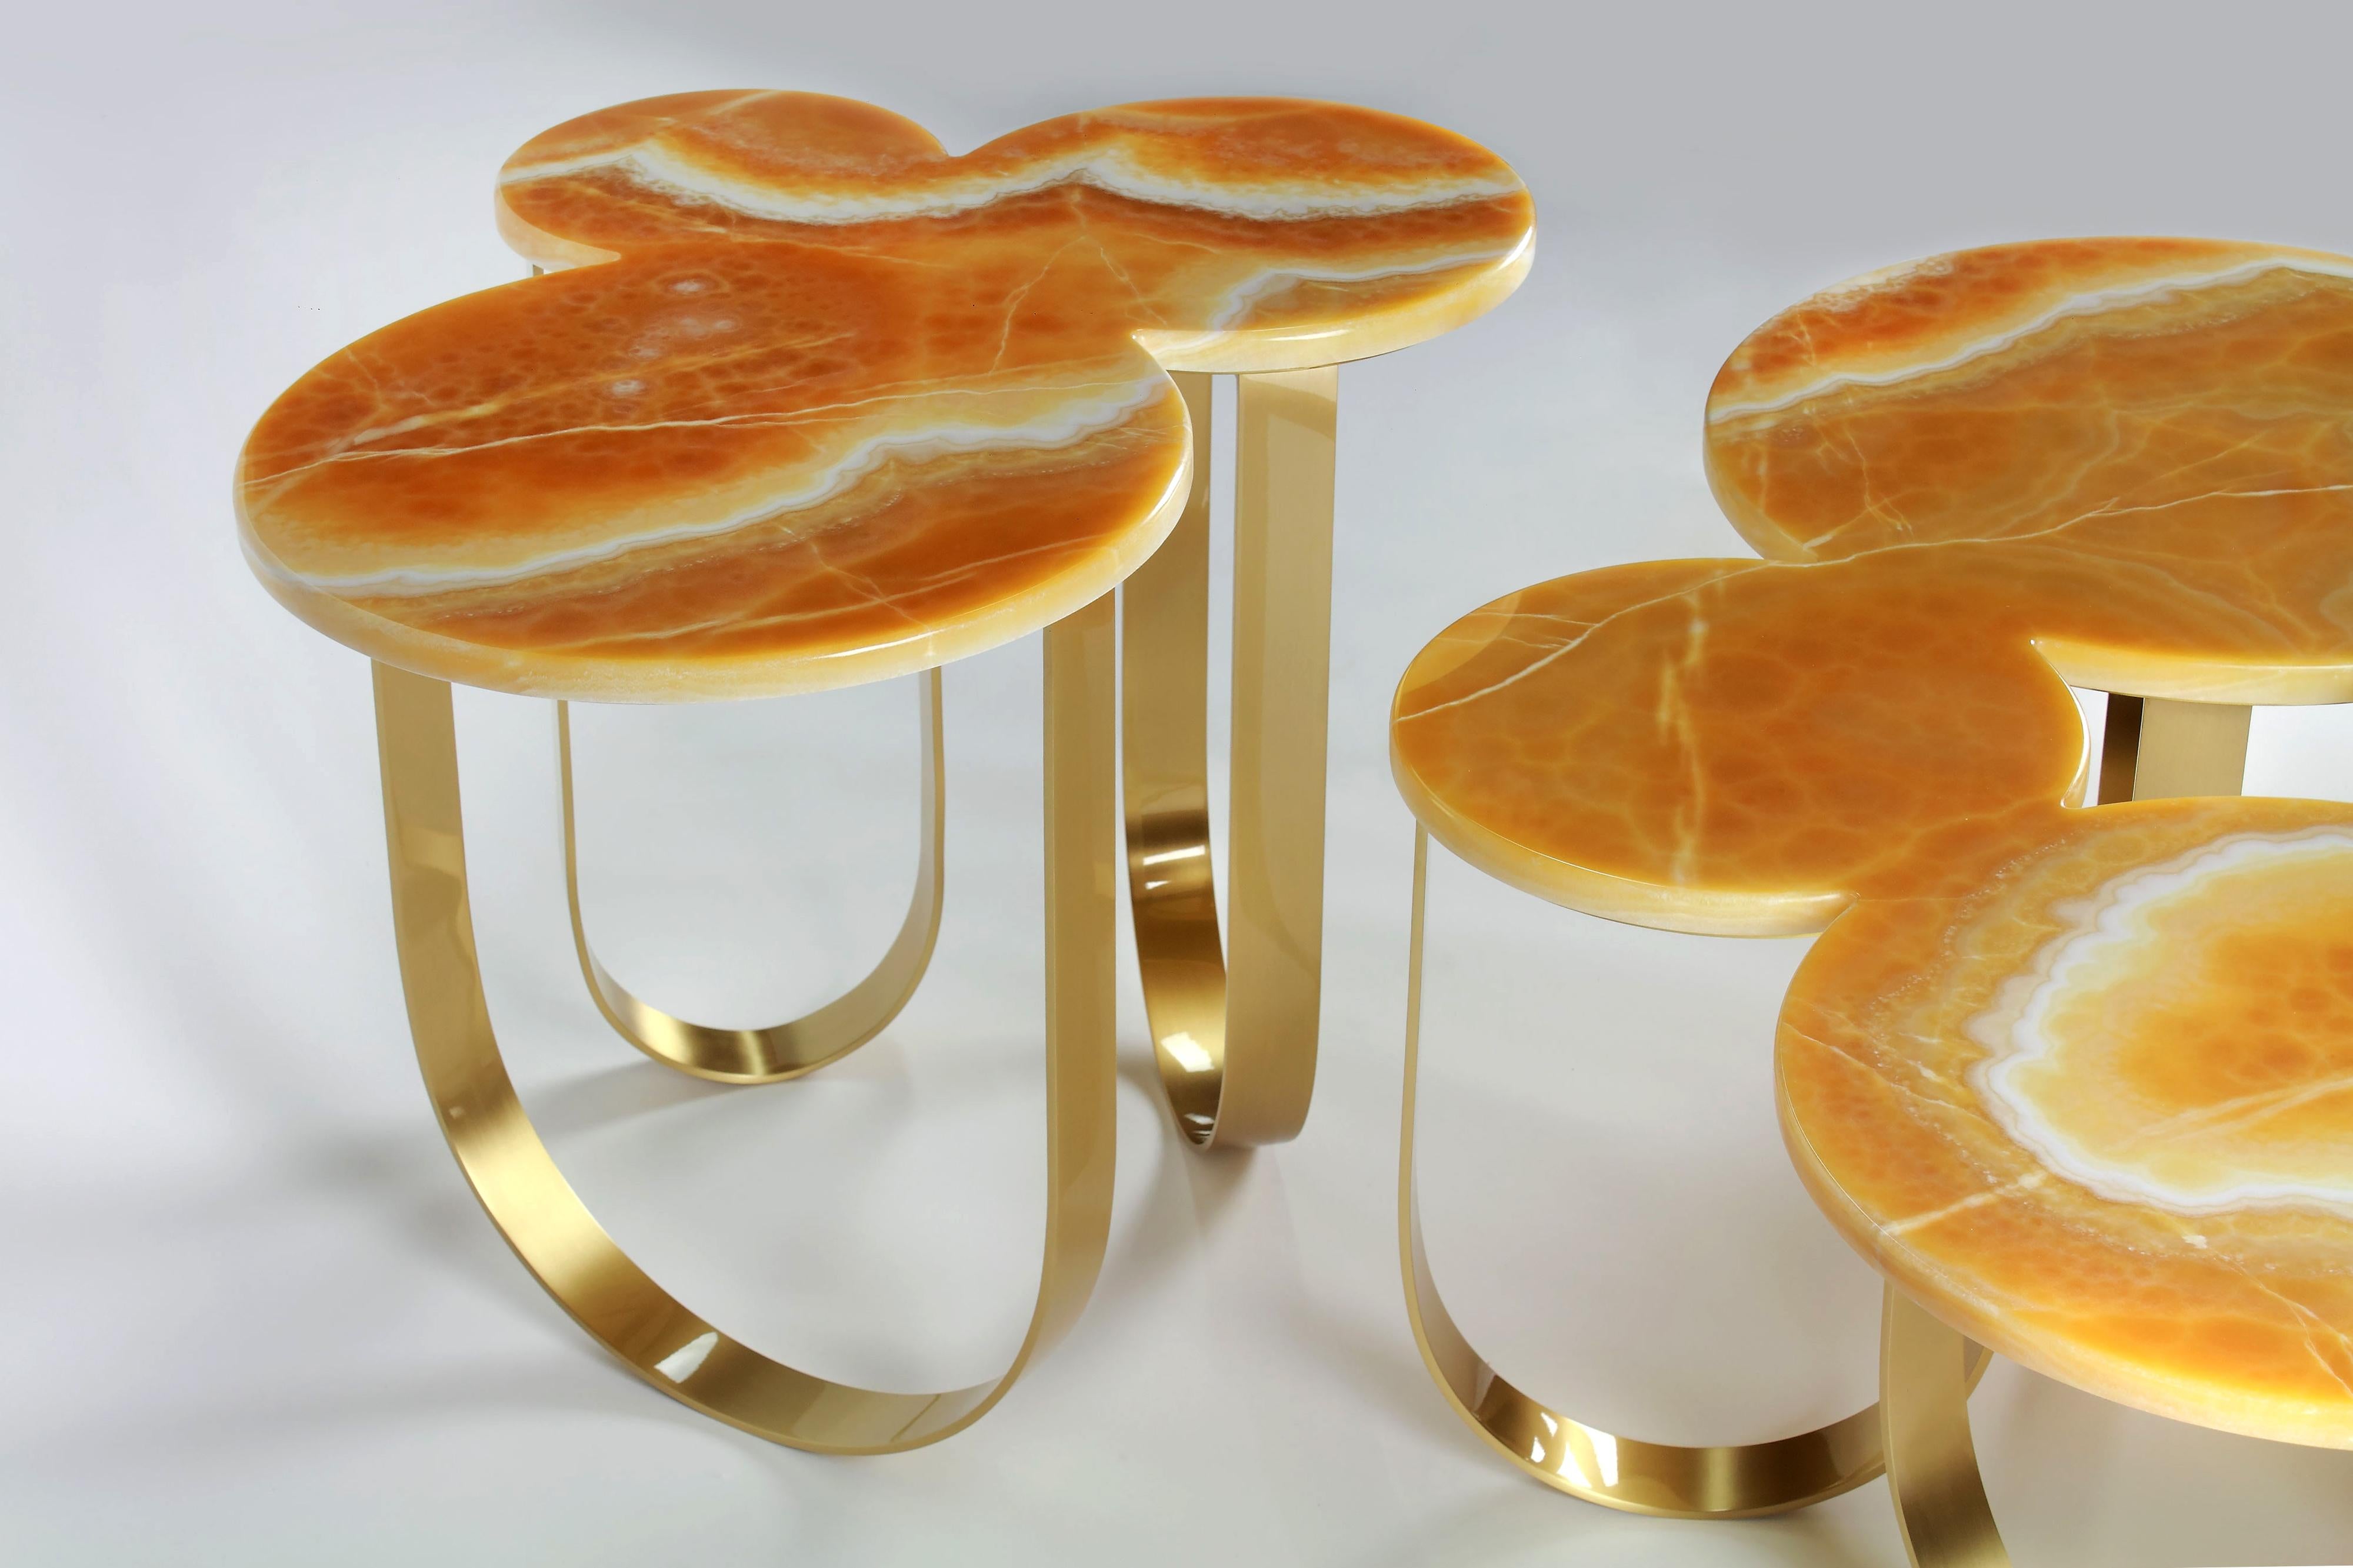 Italian Side or End Table Organic Shape Orange Onyx Brass Handmade Collectible Design For Sale